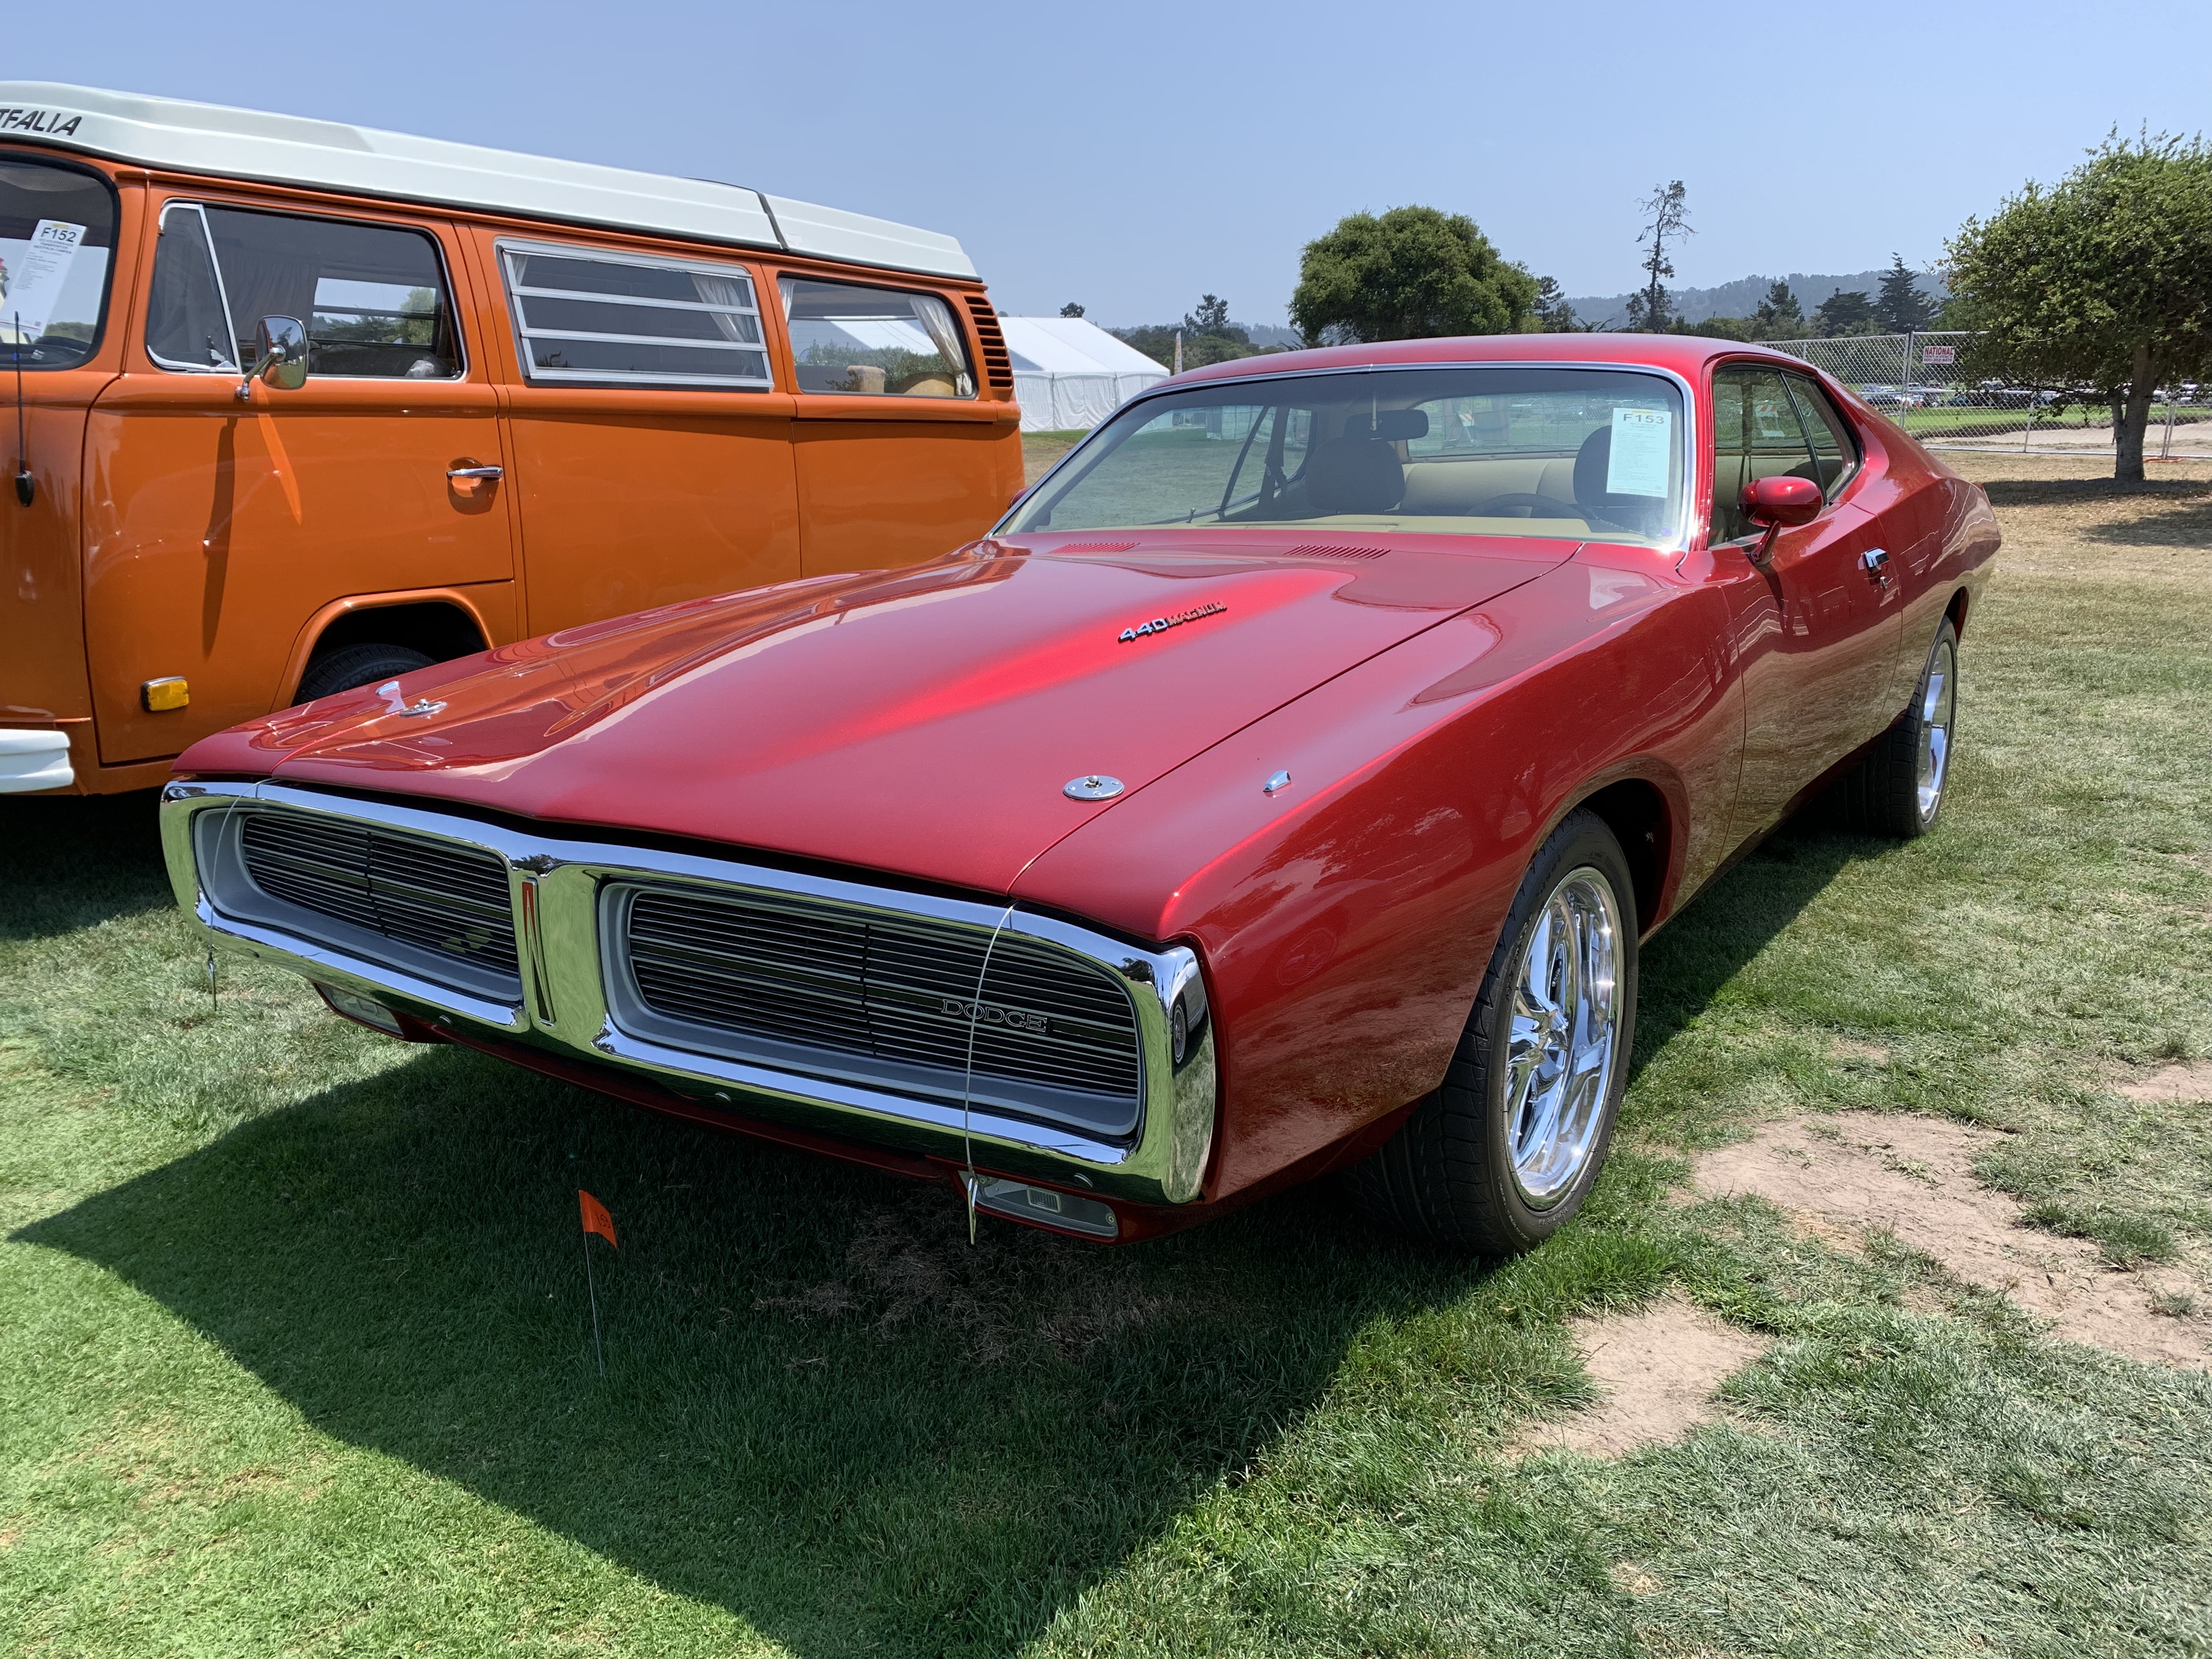 1973 Dodge Charger SE Values | Hagerty Valuation Tool®